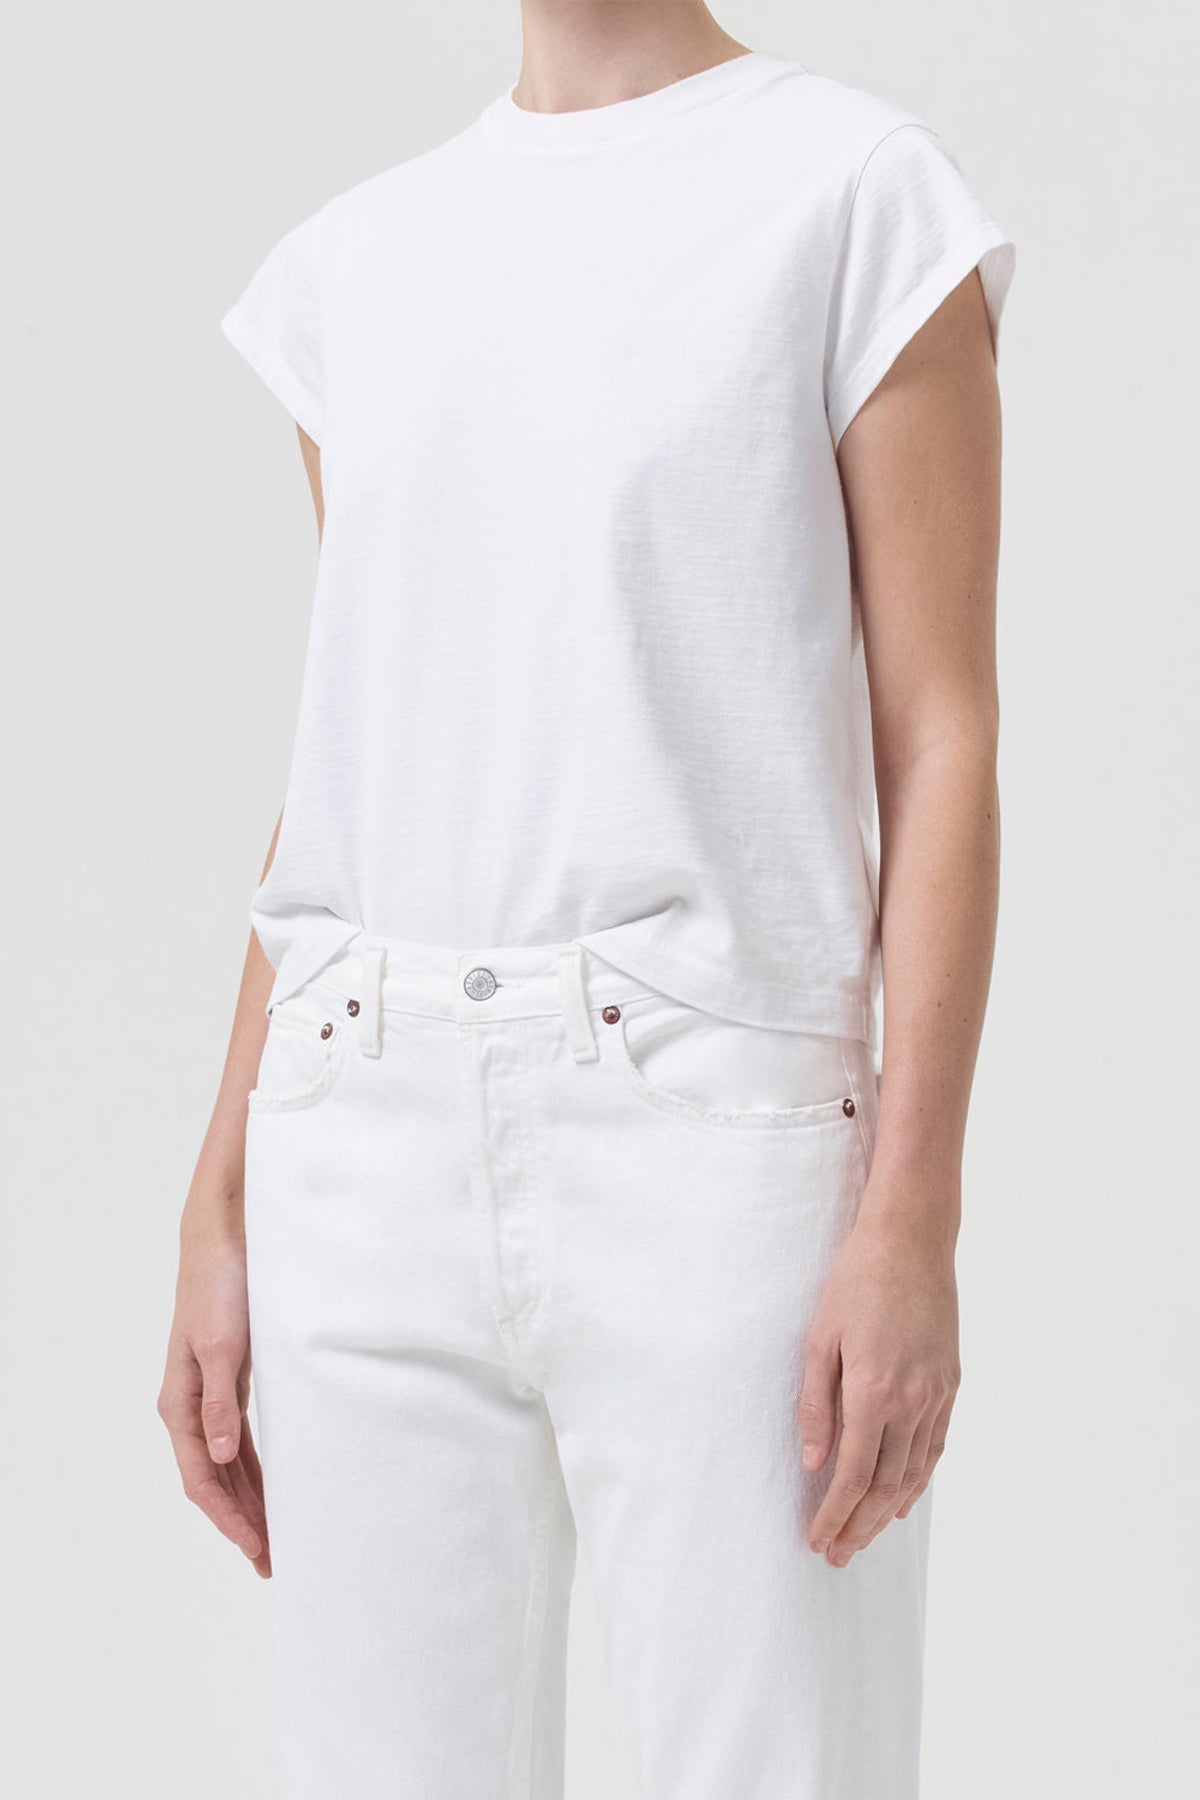 Bryce Tee in White - shop-olivia.com